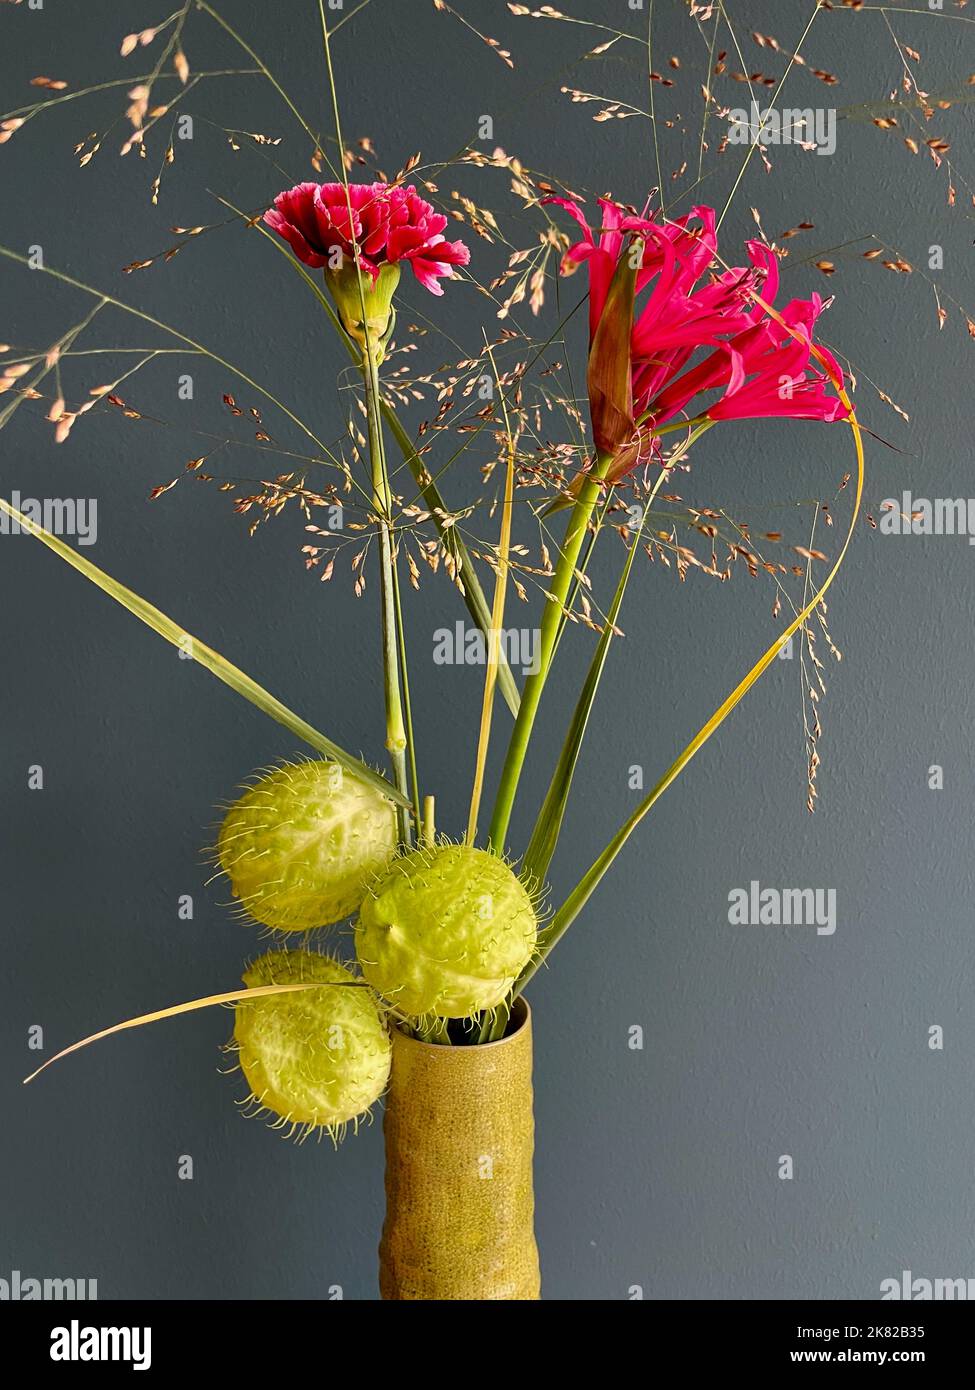 Swan plant, African milkweed, ballon plant and purple carnation flower in green ceramic vase against petrol blue wall. High quality photo Stock Photo